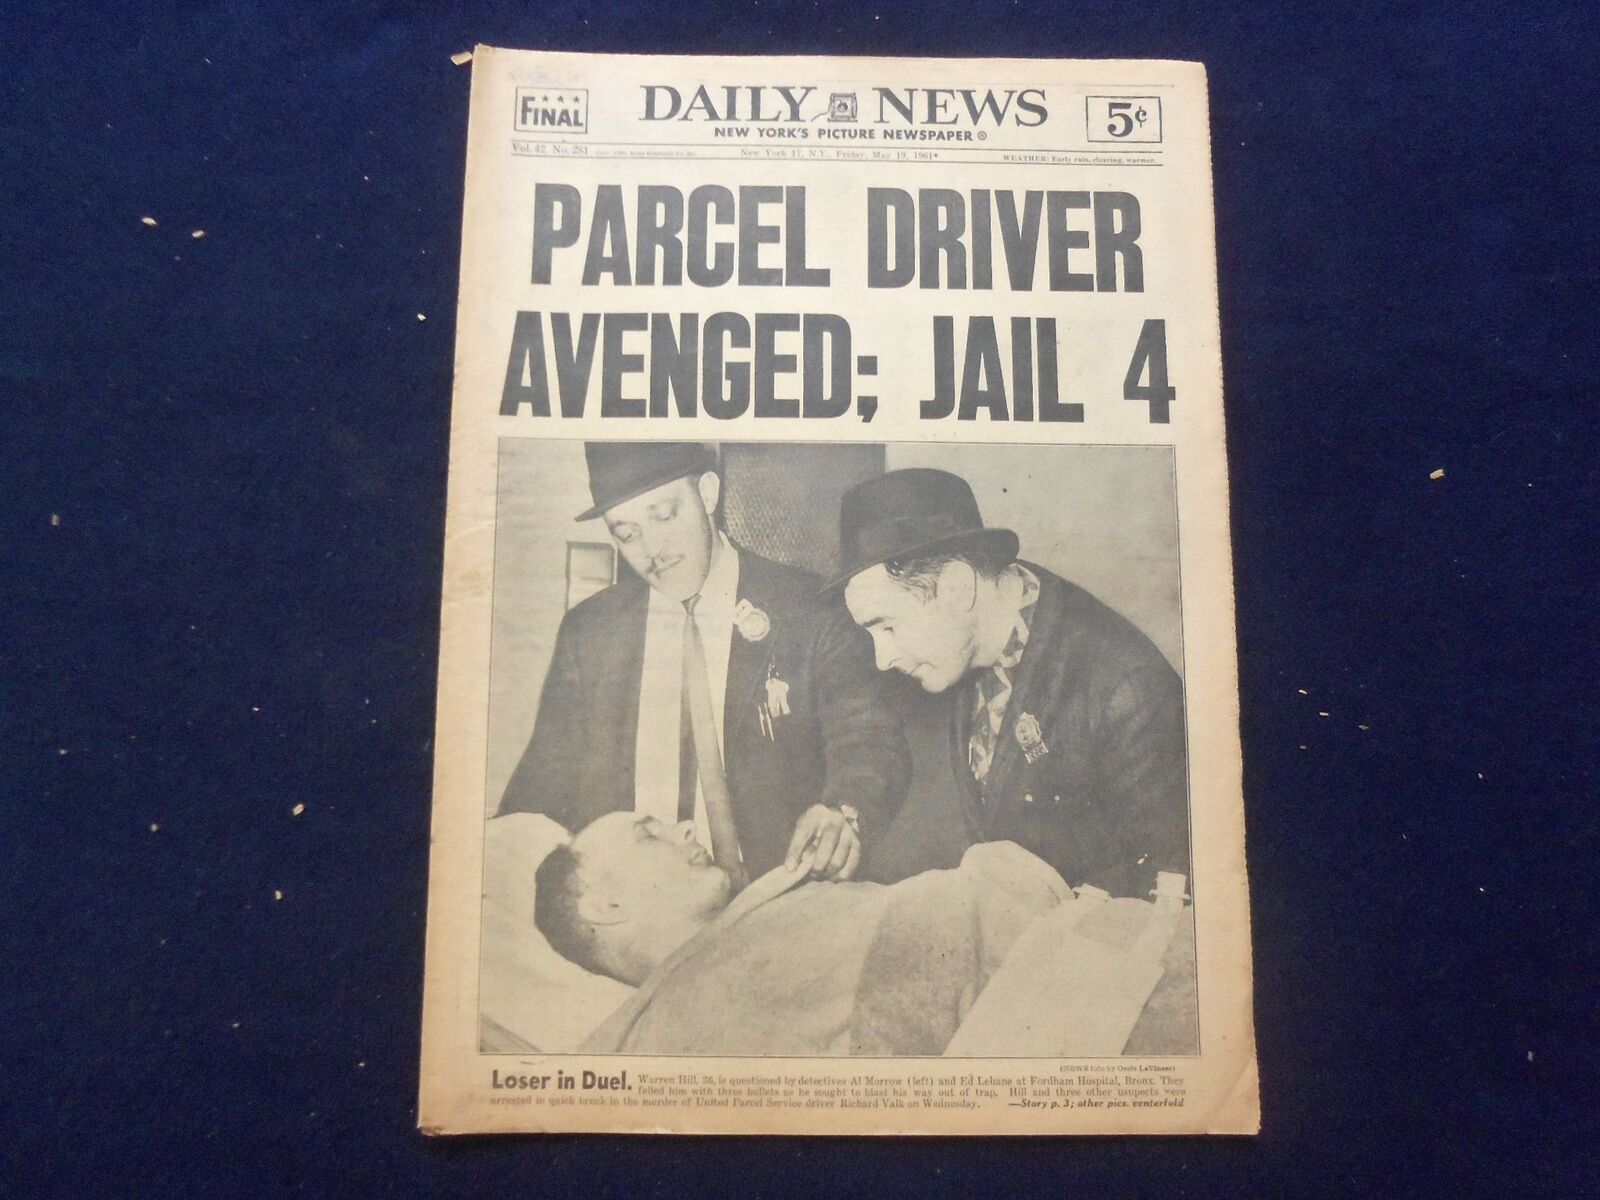 1961 MAY 19 NEW YORK DAILY NEWS NEWSPAPER-PARCEL DRIVER AVENGED: JAIL 4- NP 6761